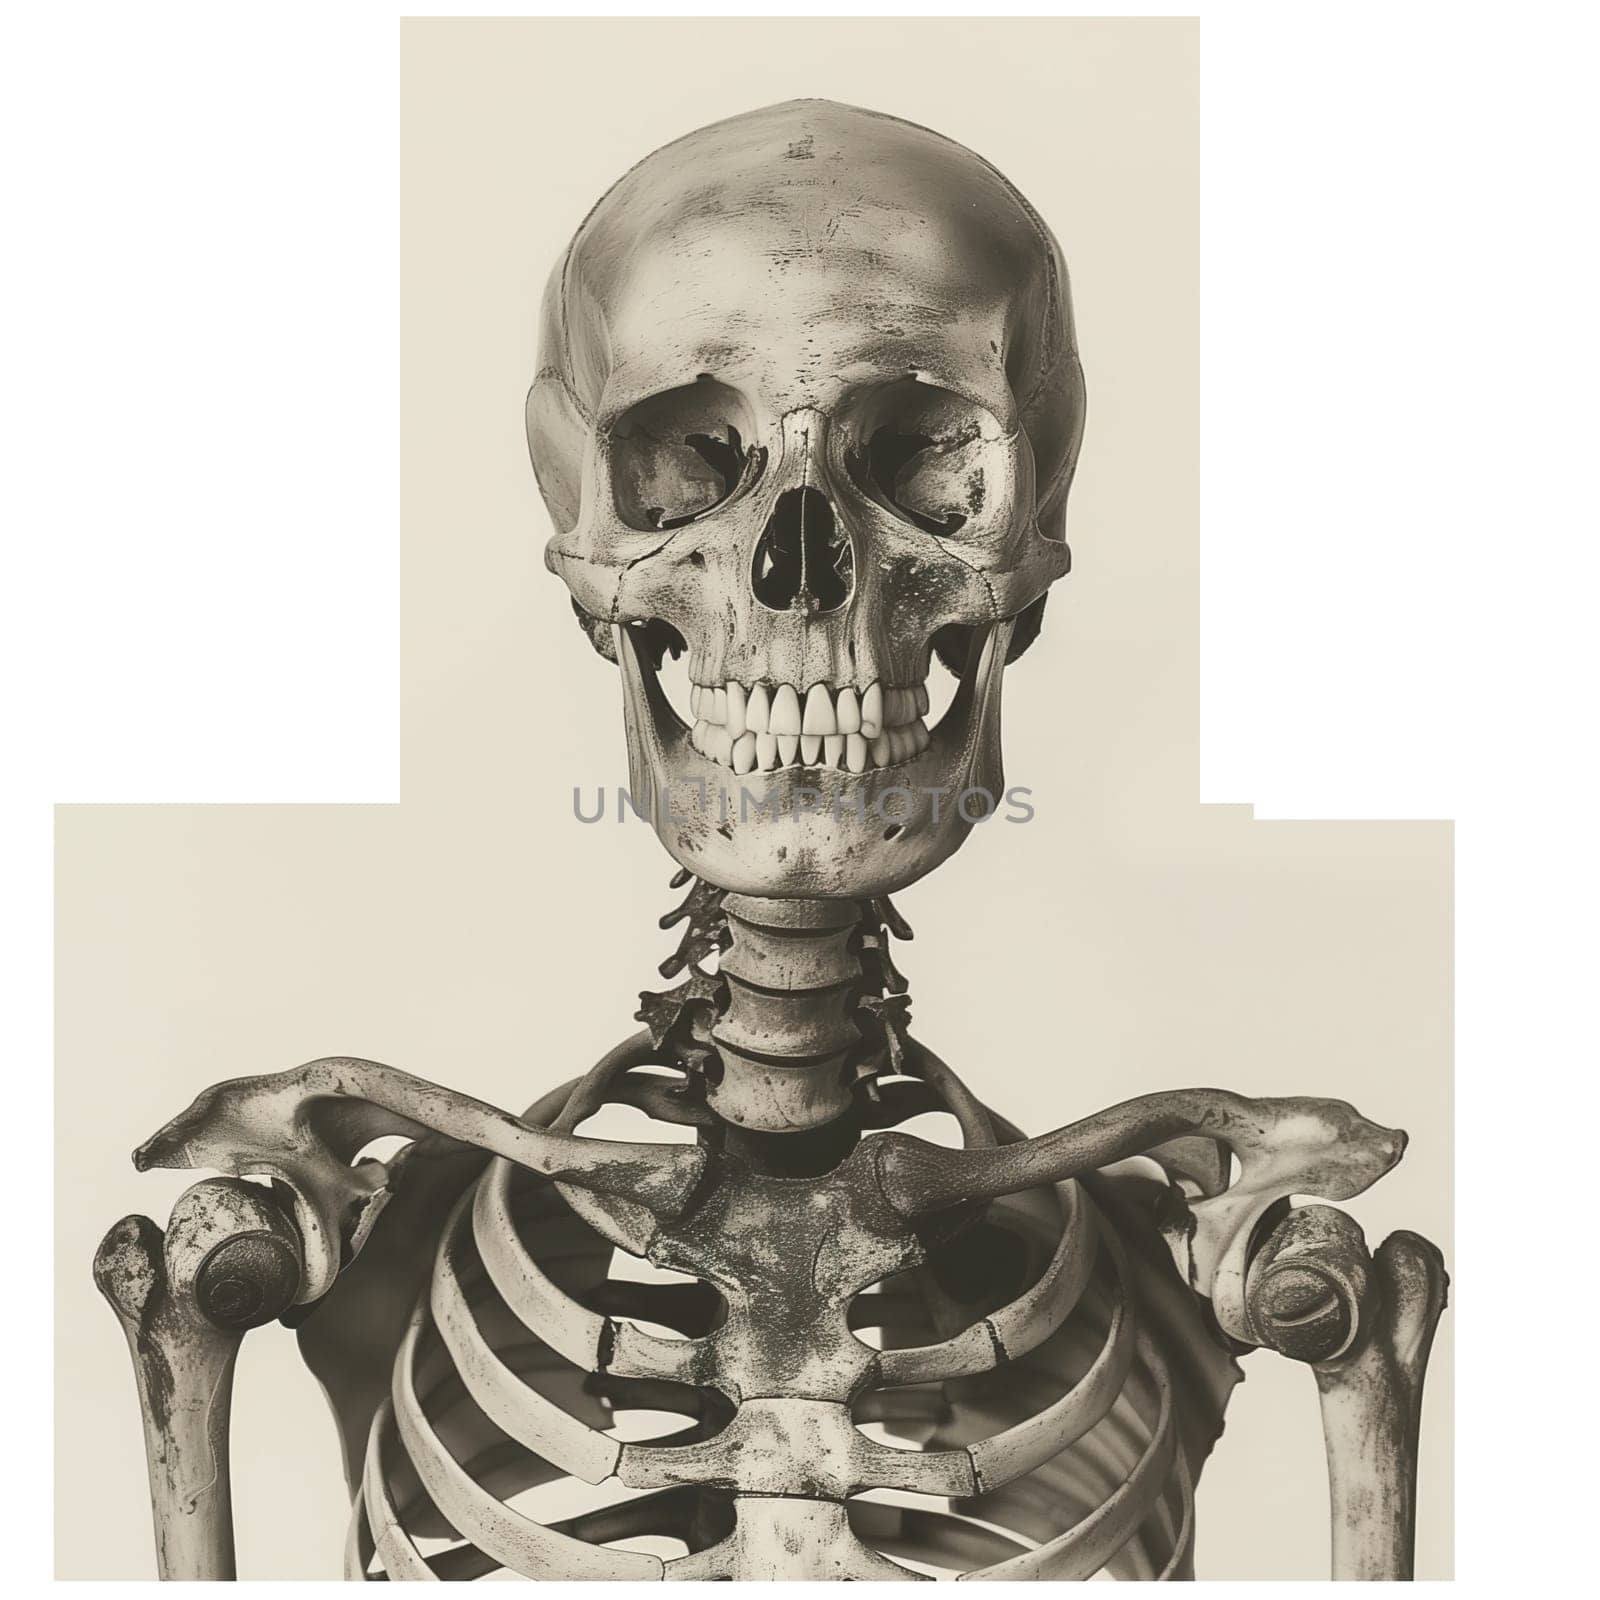 Monochrome vintage photo of halloween skeleton cut out image by Dustick